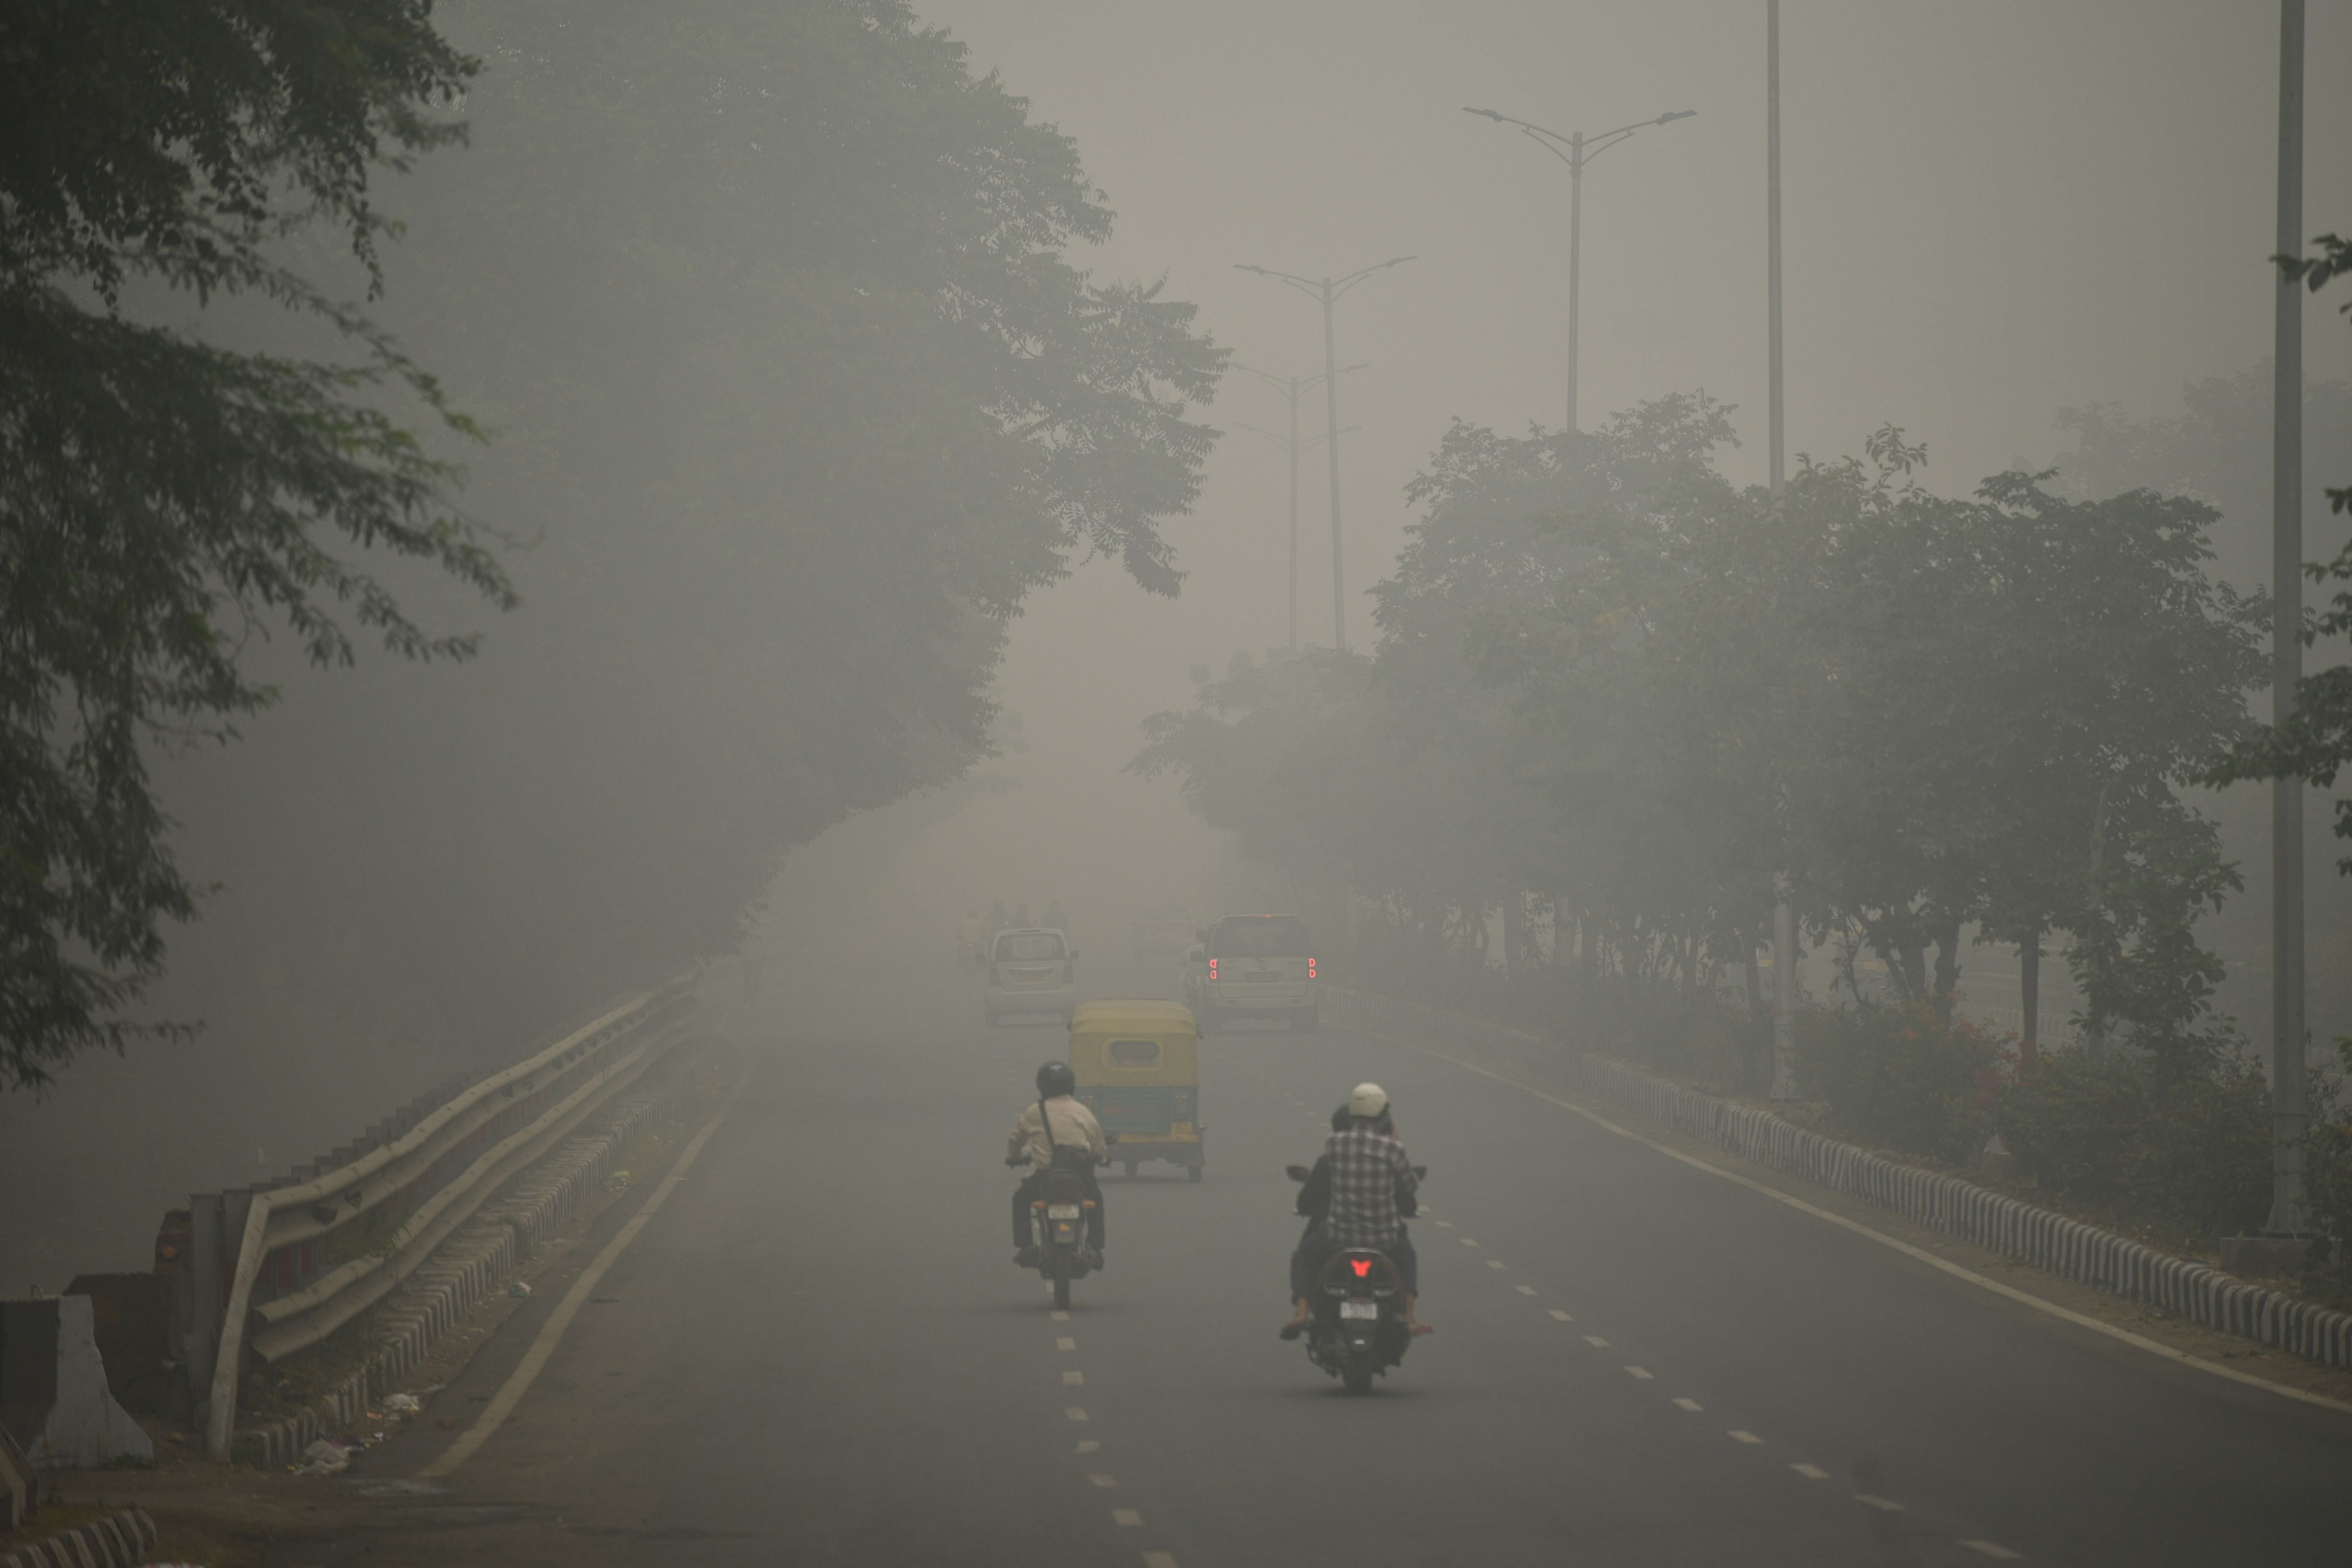 Motorists drive along a road under heavy smog condition in New Delhi. (AFP Photo)